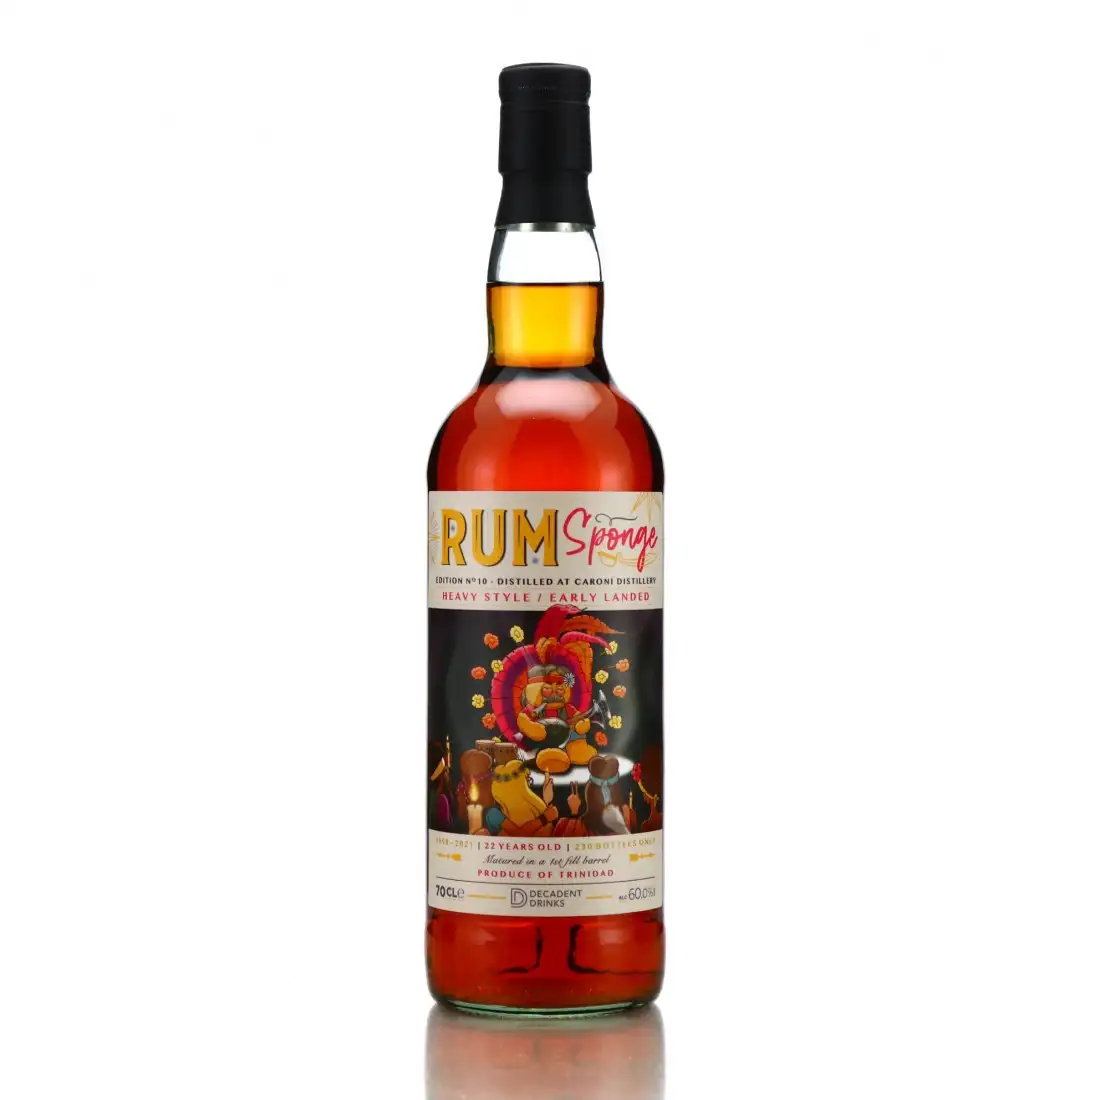 Image of the front of the bottle of the rum Rum Sponge No. 10